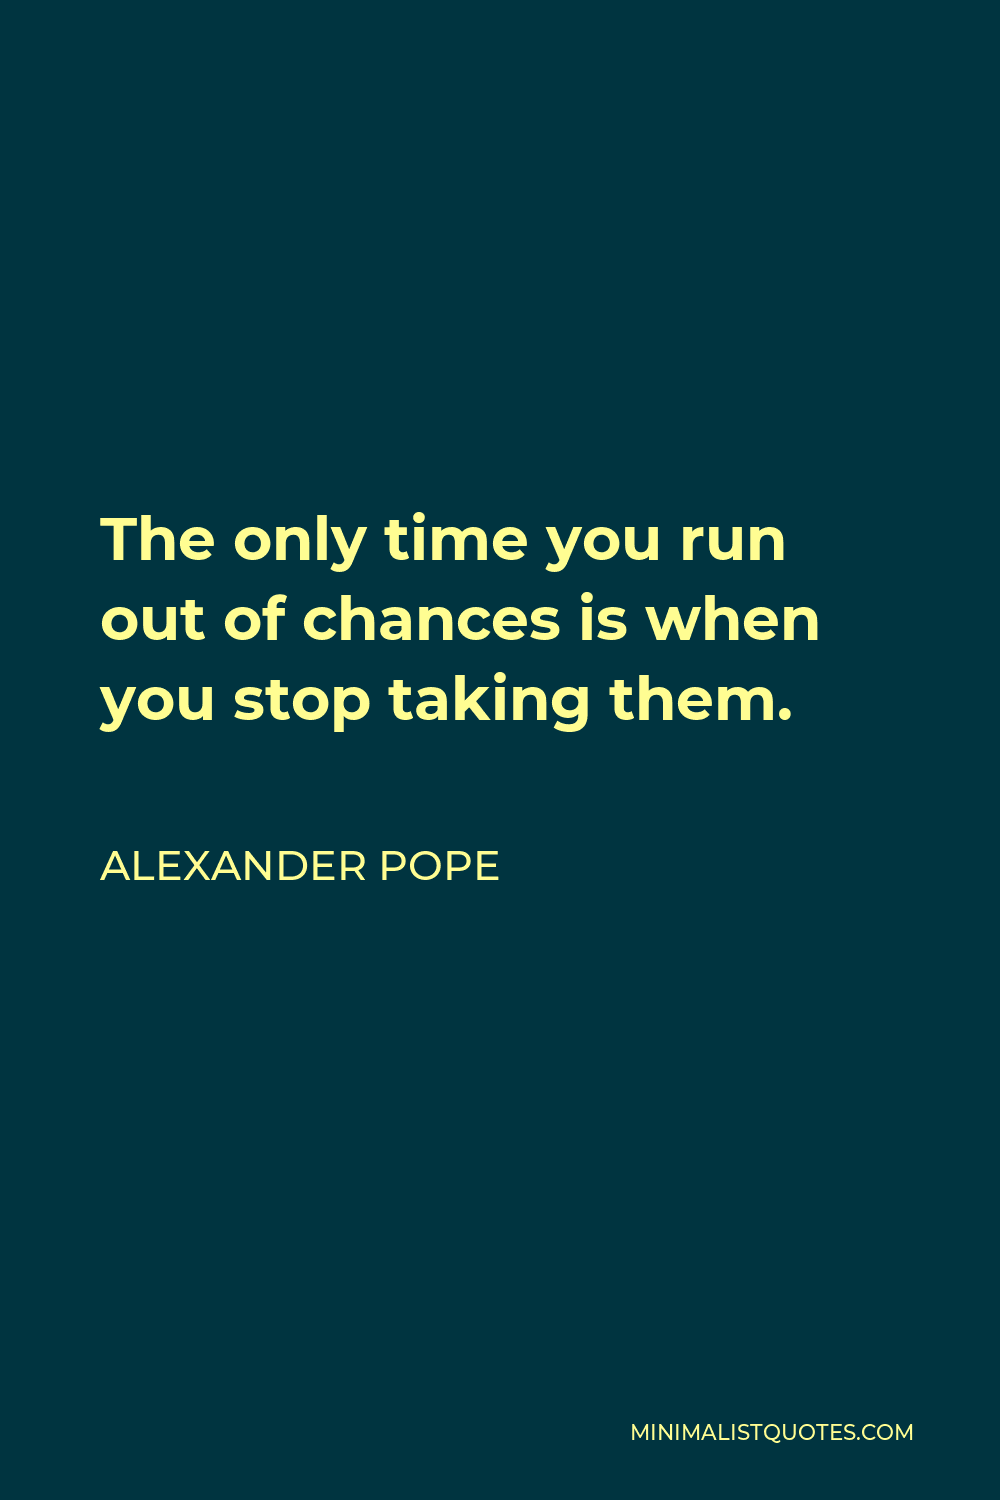 Alexander Pope Quote - The only time you run out of chances is when you stop taking them.